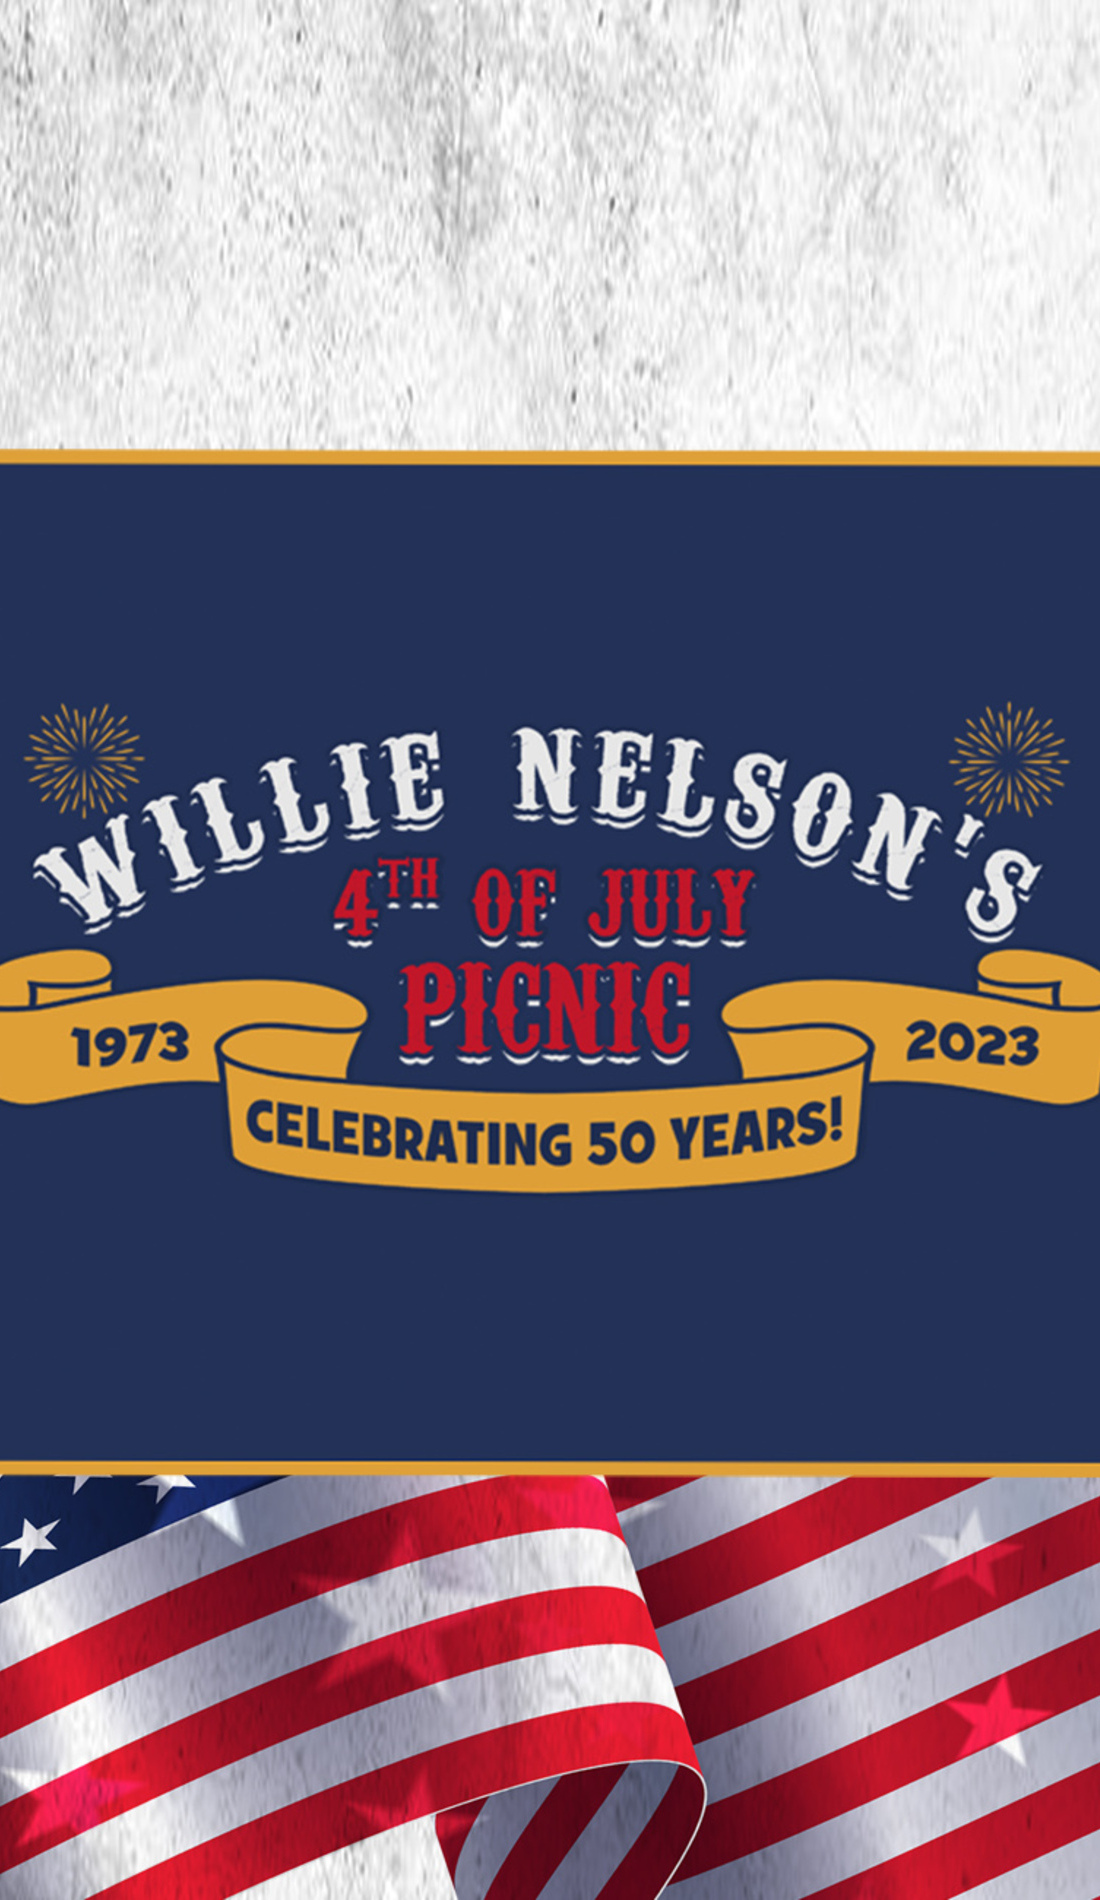 A Willie Nelson's 4th of July Picnic live event